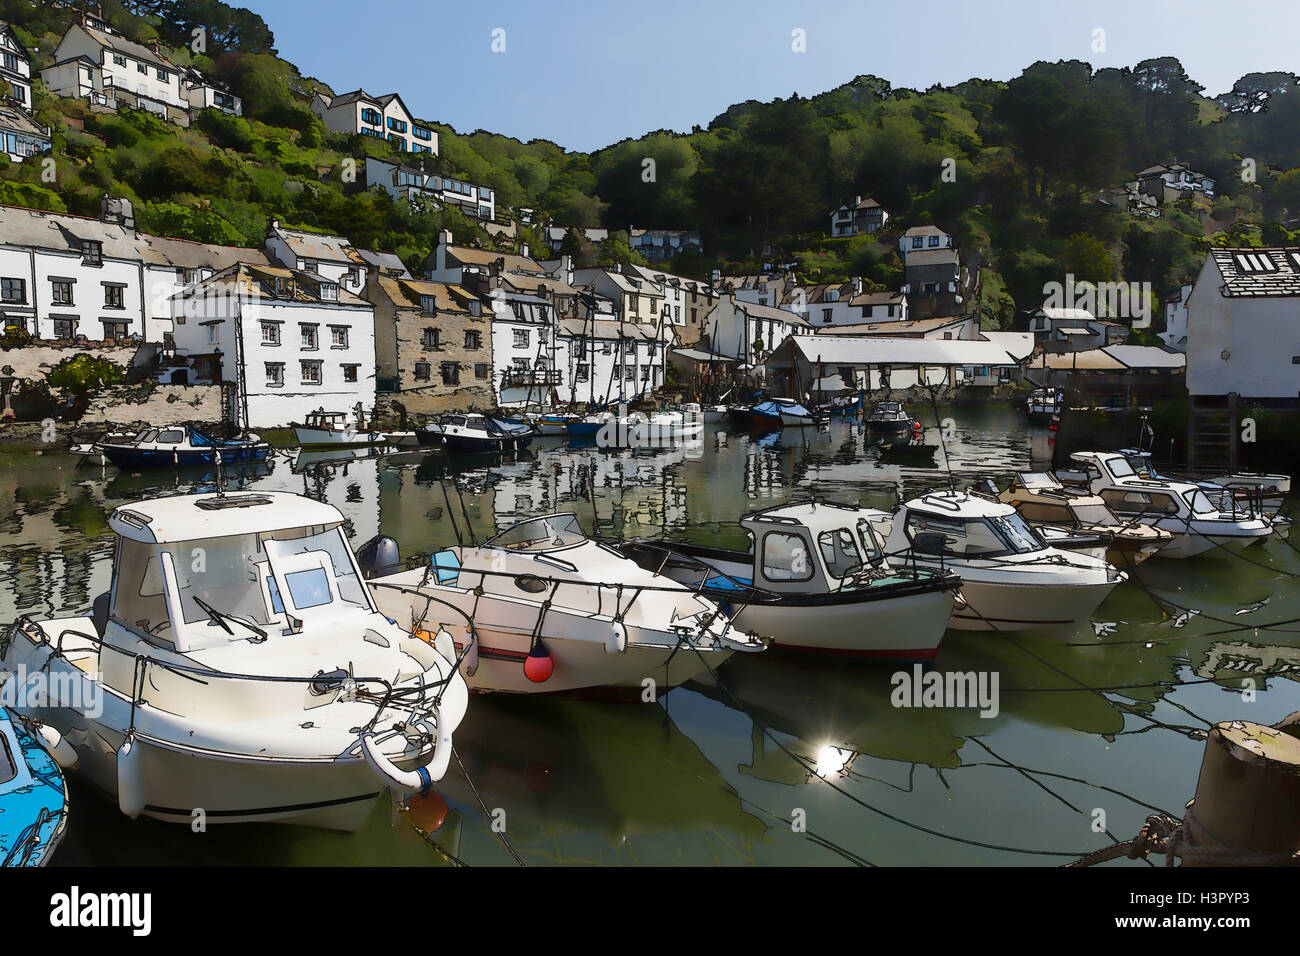 Boats in Polperro harbour Cornwall UK illustration in summer Stock Photo